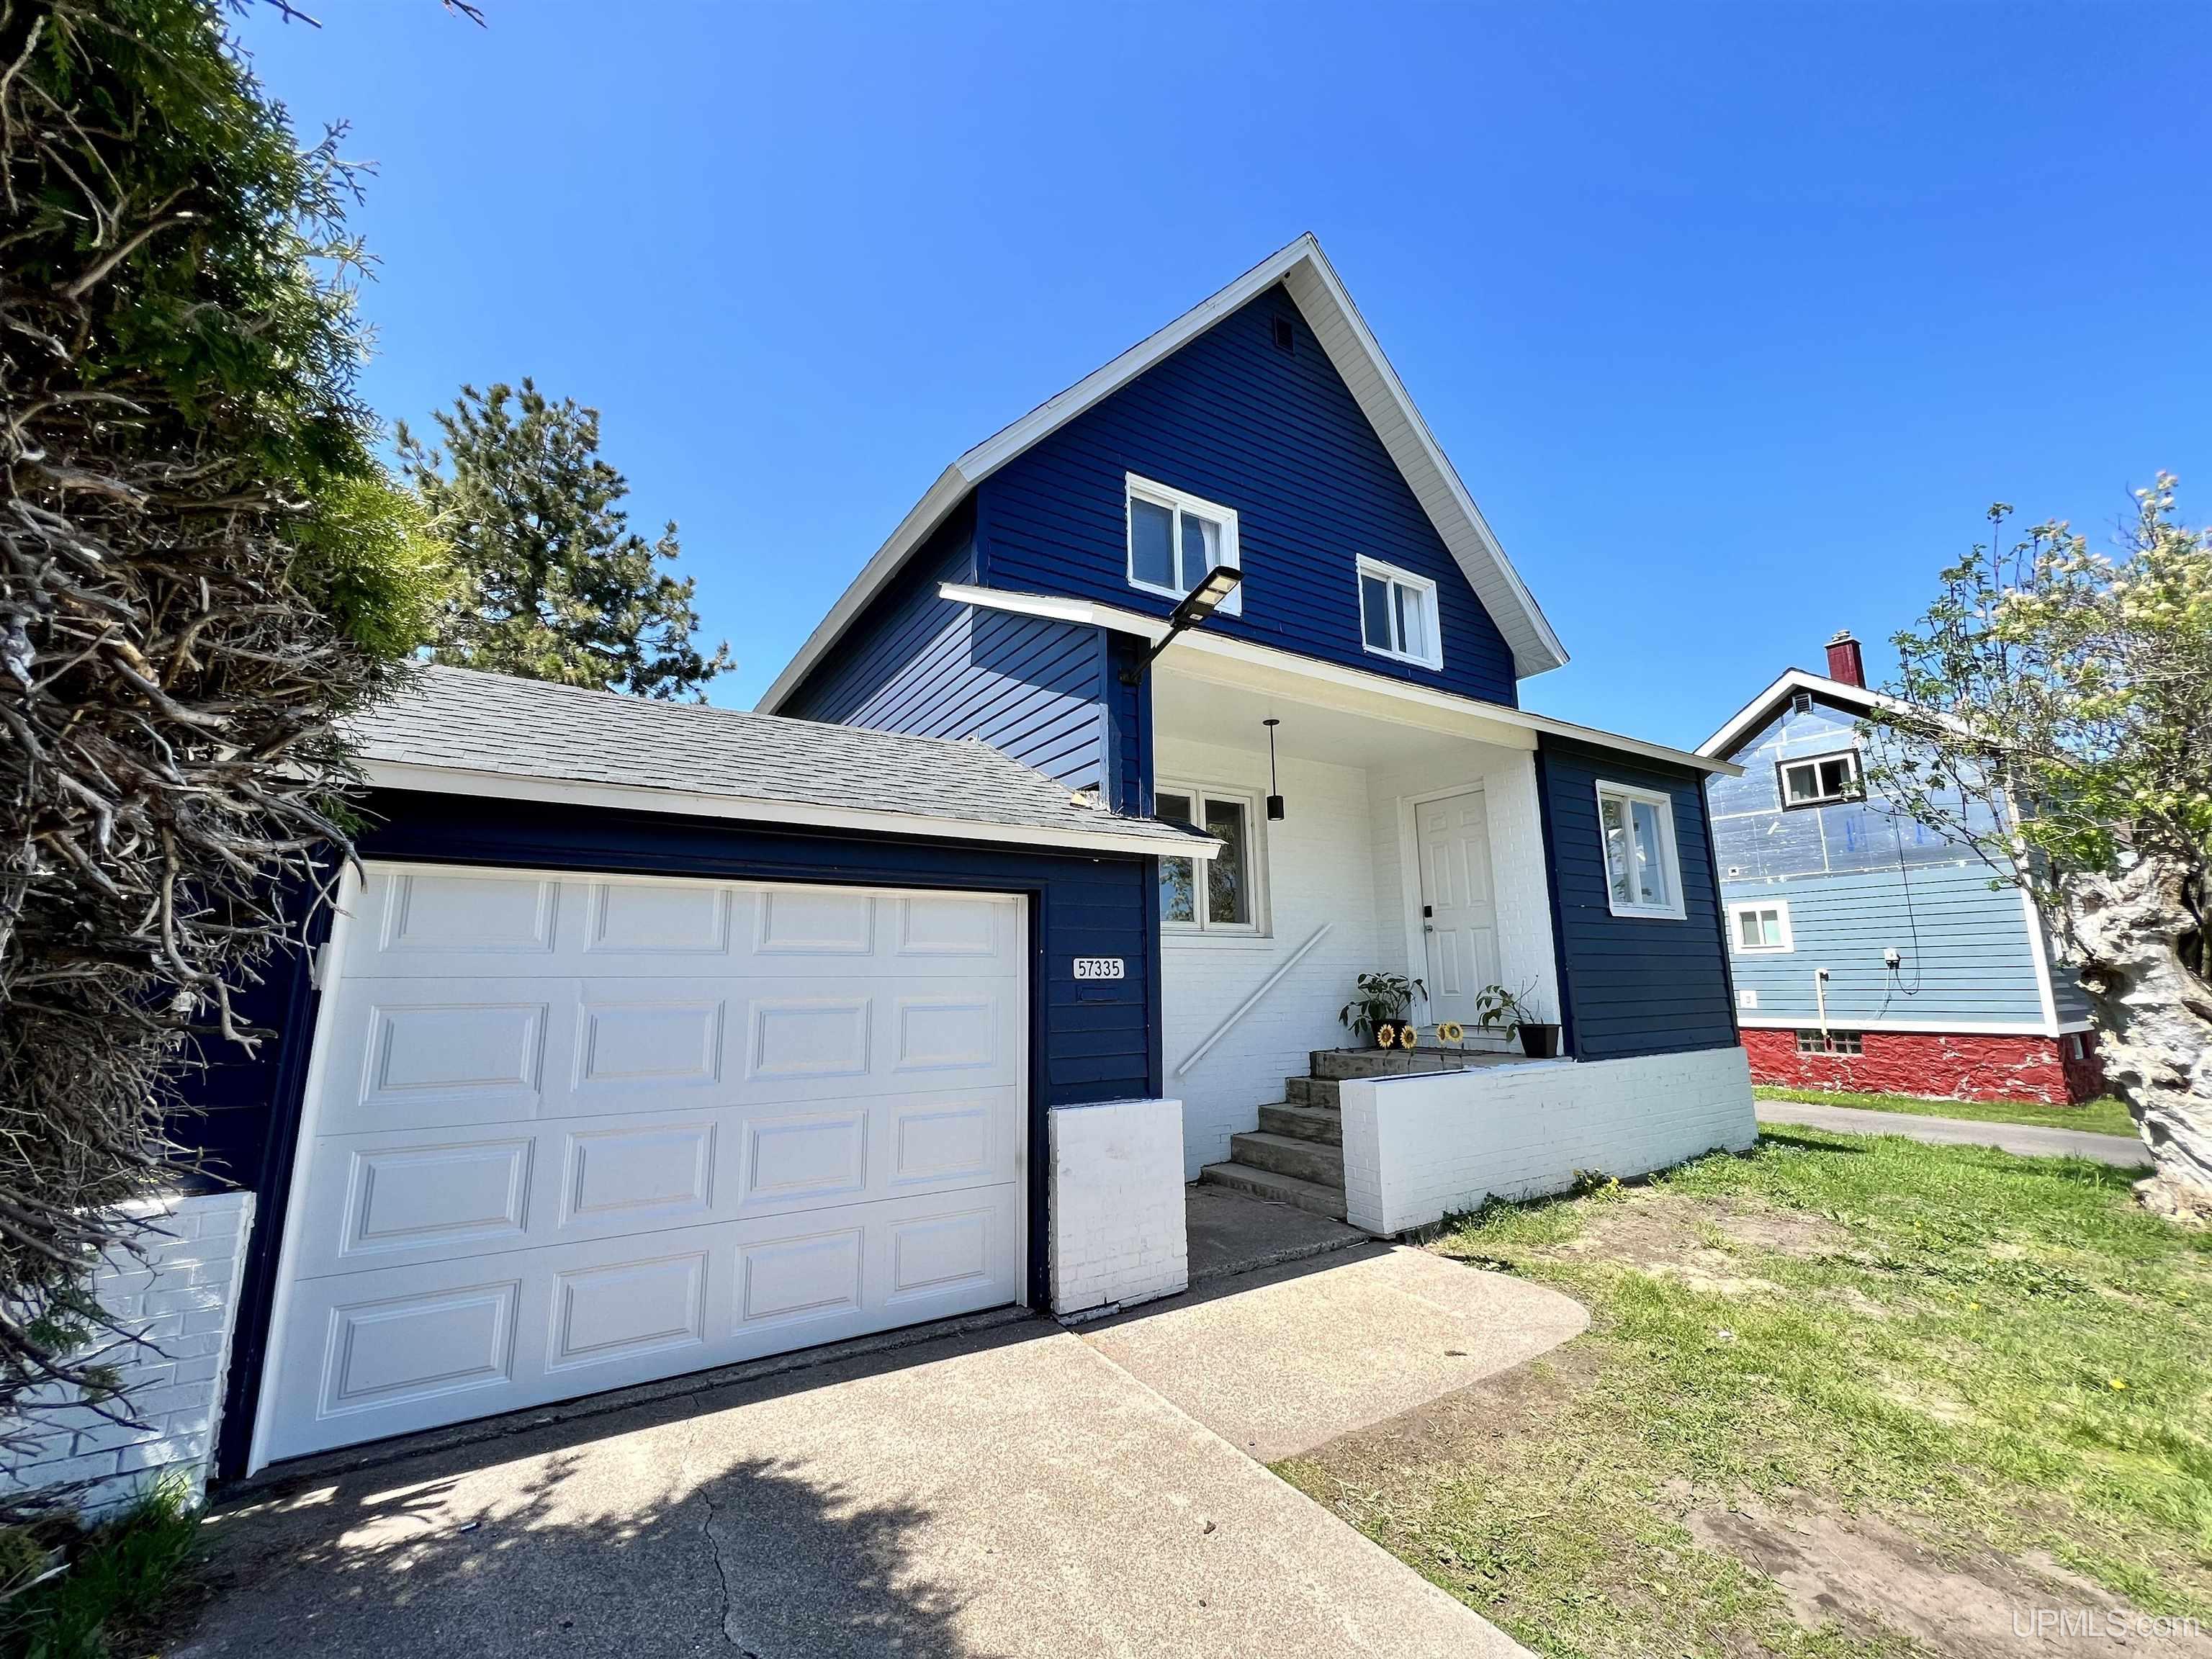 This is a conventional 2 story home located in the heart of Calumet. It is in close proximity to the school, local shops, snowmobile/ATV trails, Swedetown recreational park, and a 10 +/- minute drive to the beach.  In the last couple of years this home has been renovated from top to bottom. Some of the improvements include: a complete reconfiguration of the living room and kitchen, new cabinets, countertops, flooring, lighting. The main floor bathroom has been remodeled and laundry facilities added. A new roof was added, new furnace installed, new water heater, new plumbing, natural gas hookup and the list goes on... As you enter this home, there is a little mud room that leads you to the front of the home. This is a large and open living area. Keep going and you will be led to the huge kitchen. There is a lot of cabinet room for storage. You will find a full bathroom and laundry off the kitchen. There is a small deck area off the kitchen as well for outdoor entertainment. On the second floor you will find 3 bedrooms and a full bathroom. The yard is nice and open and feels very private. Closing to happen on July 16th,2023 or later.